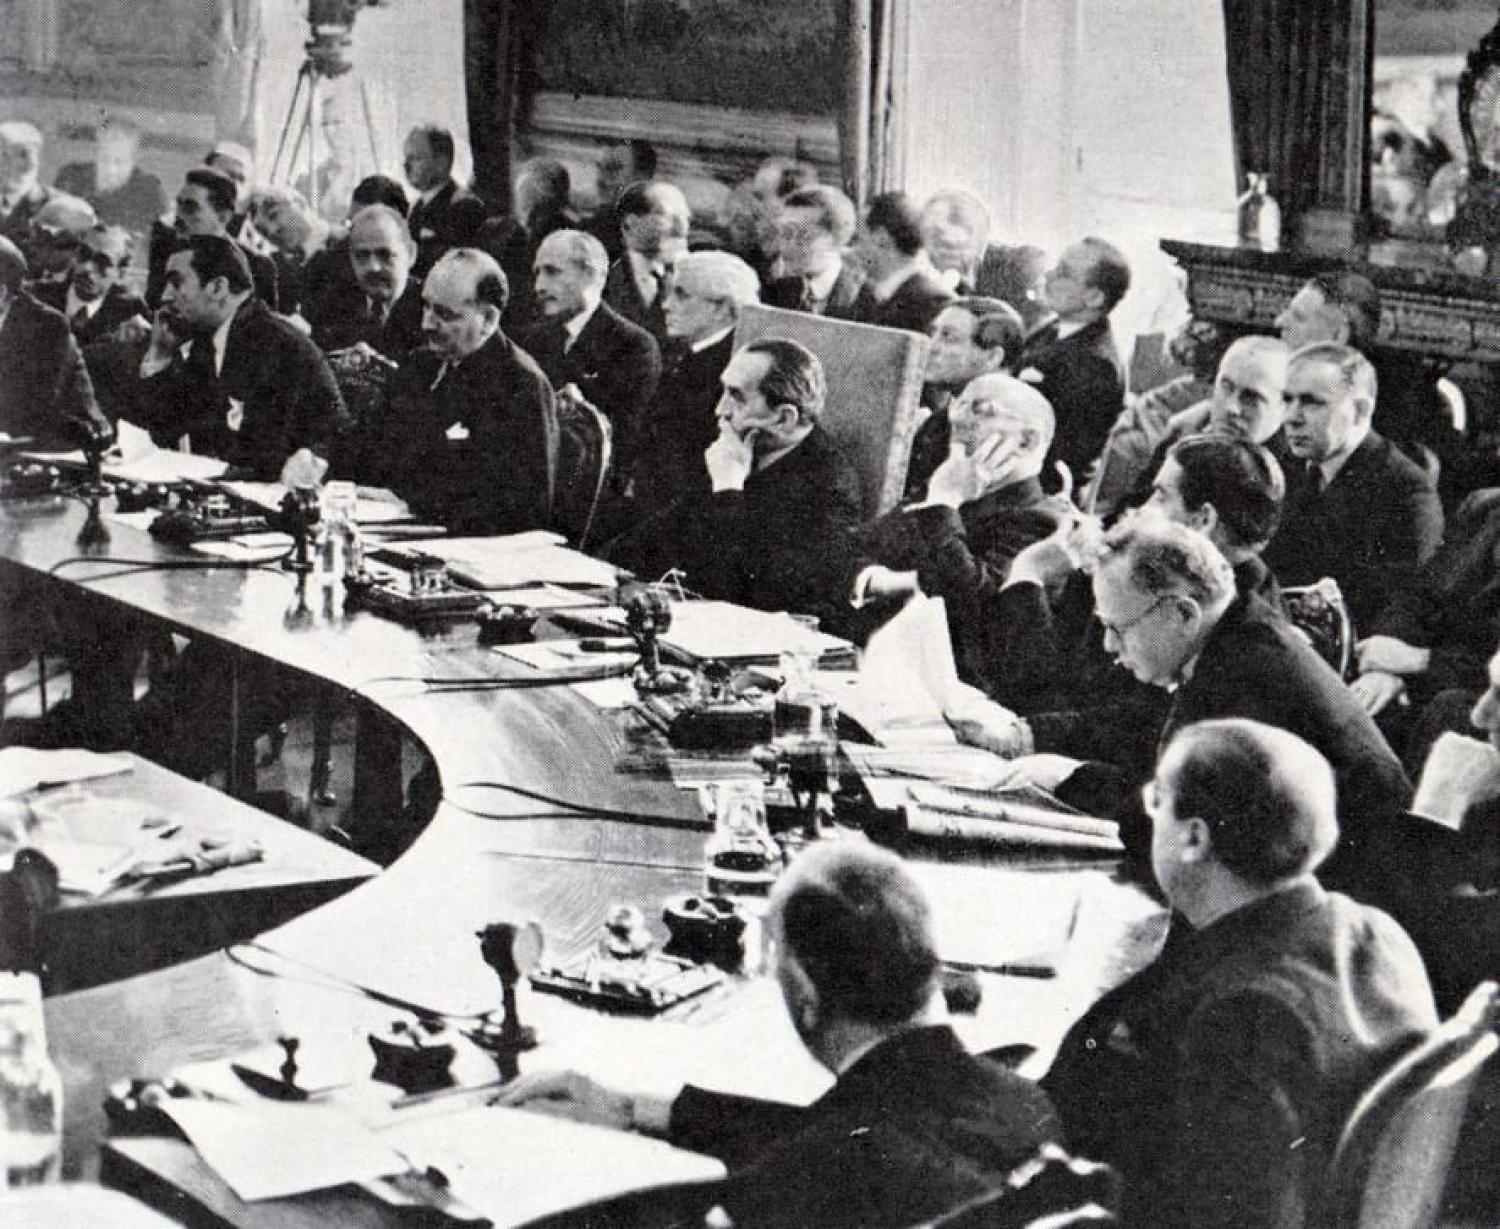 Australia's former prime minister Stanley Bruce chairing the League of Nations Council in 1936 (NAA via Wikimedia Commons)